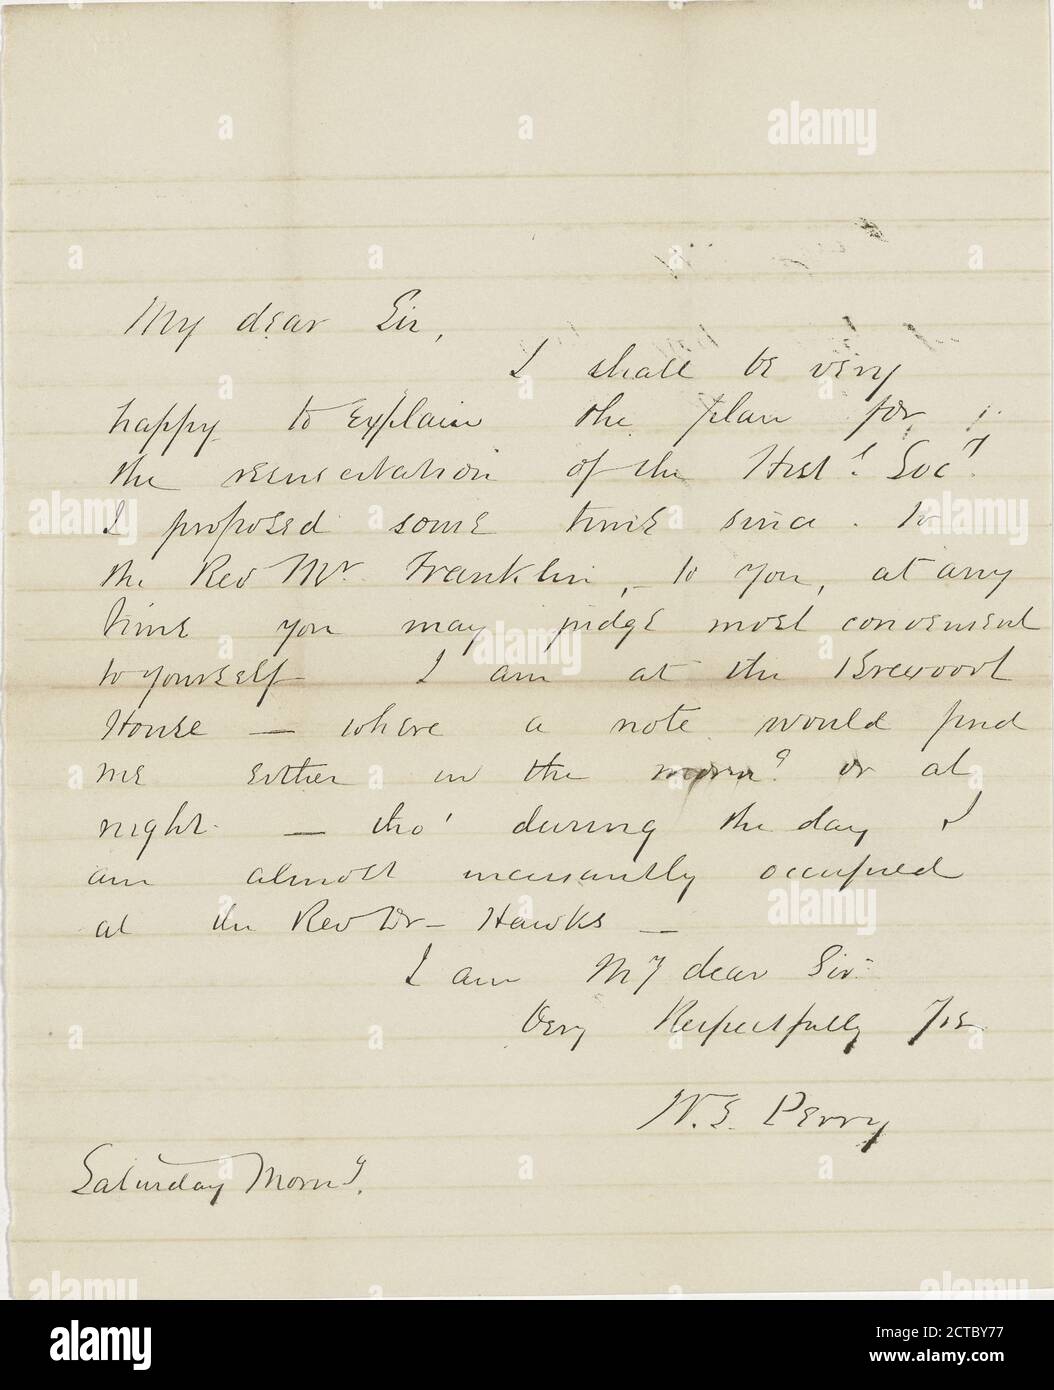 Perry, William Stevens (1832-1898), text, Correspondence, 1850 - 1868, Perry, William Stevens, 1832-1898 Stock Photo